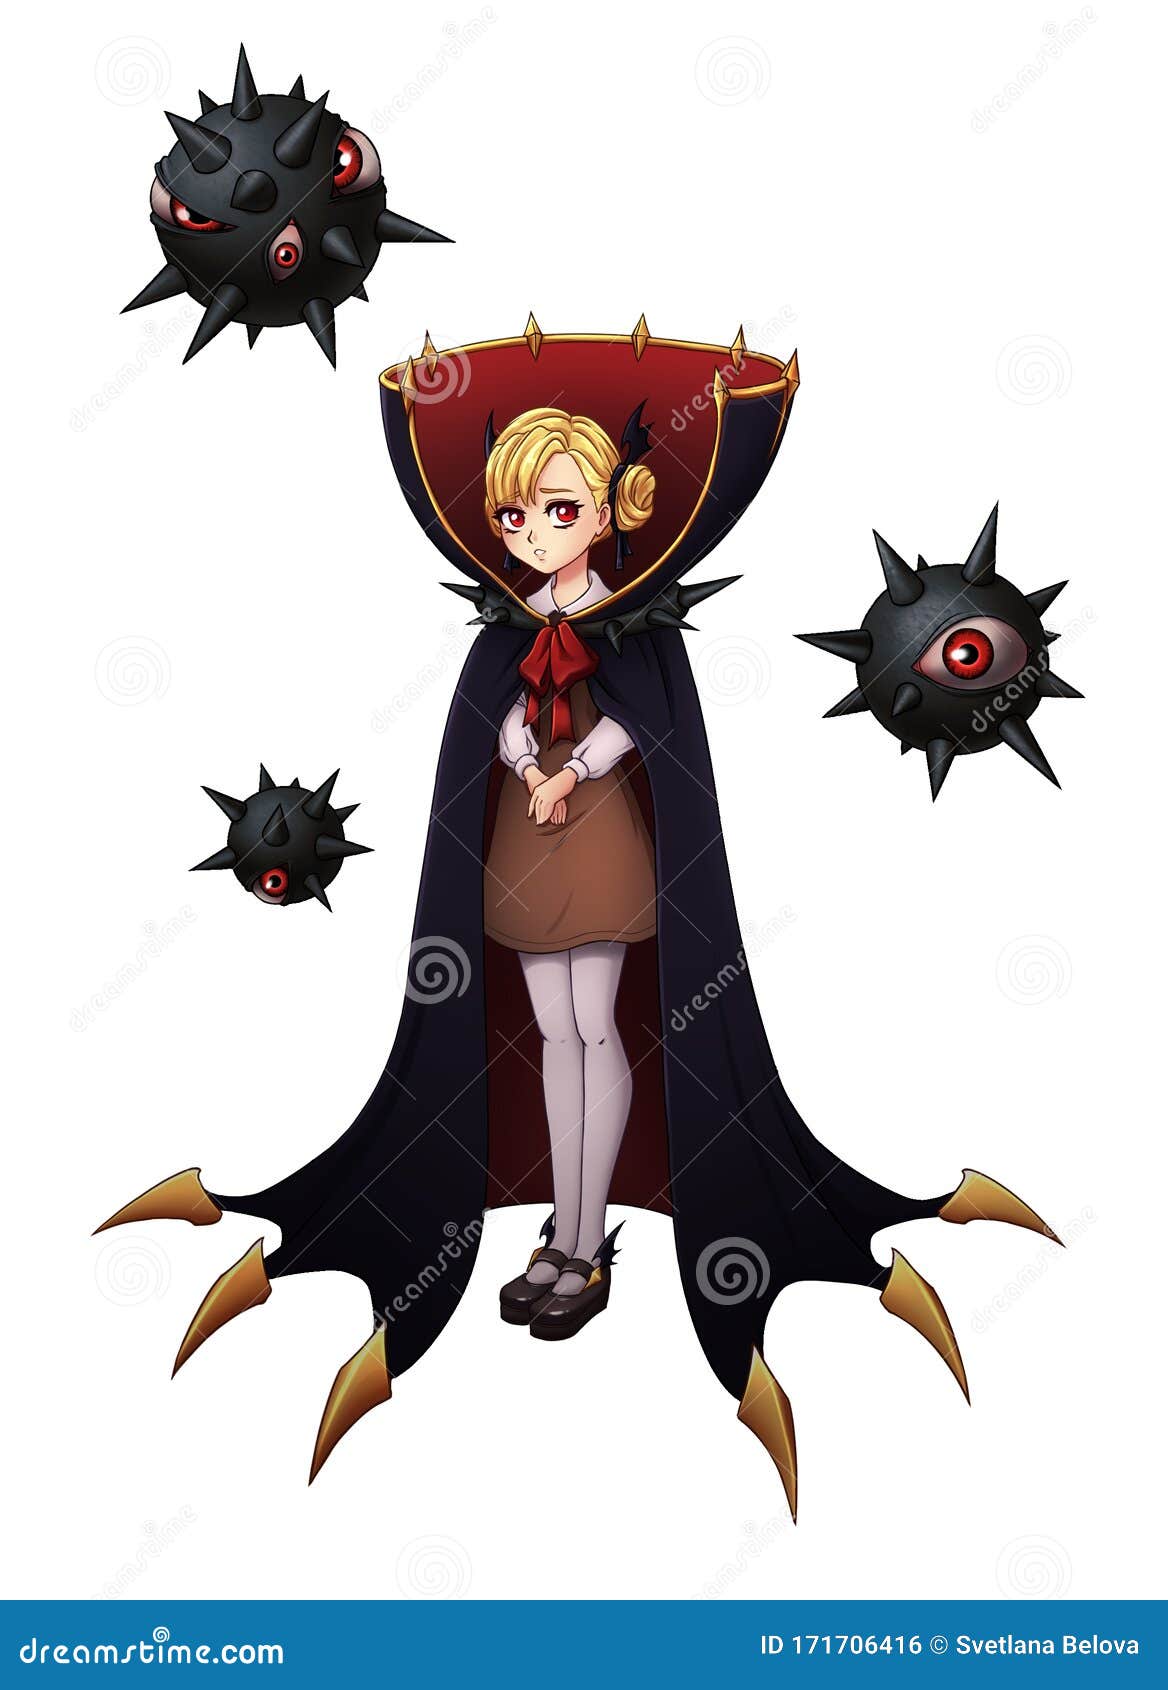 Pretty Vampire Girl with Blonde Hair, Cute Dress and Black Robe. Hand Drawn  Anime Illustration Stock Illustration - Illustration of holiday, comic:  171706416